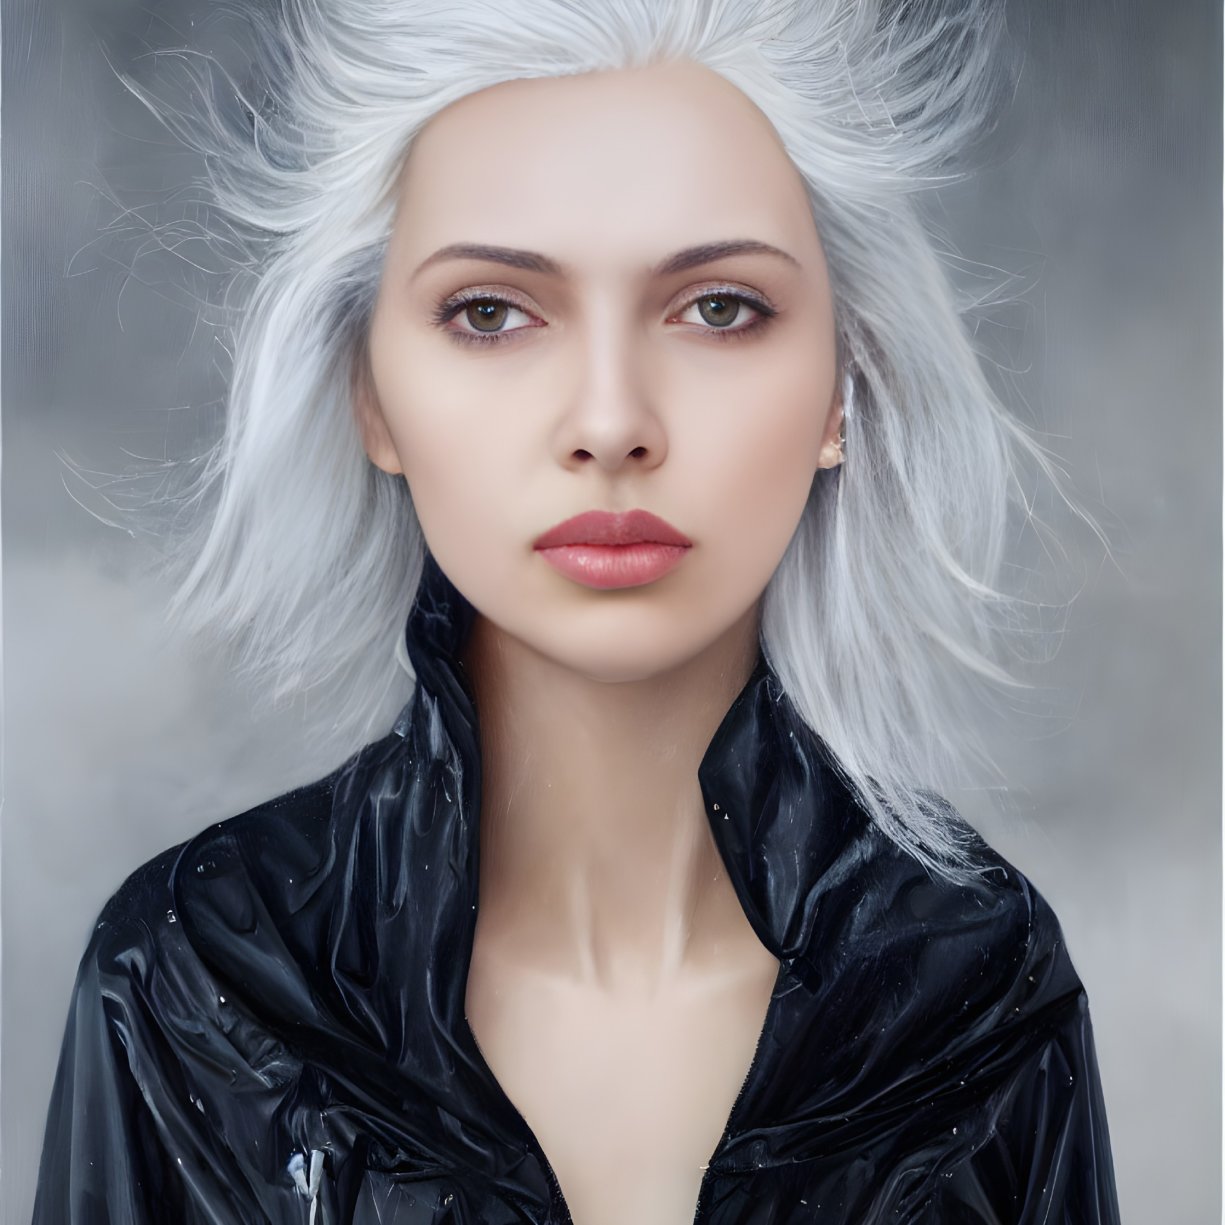 Portrait of person with pale skin, white hair, full lips, black top, gray backdrop